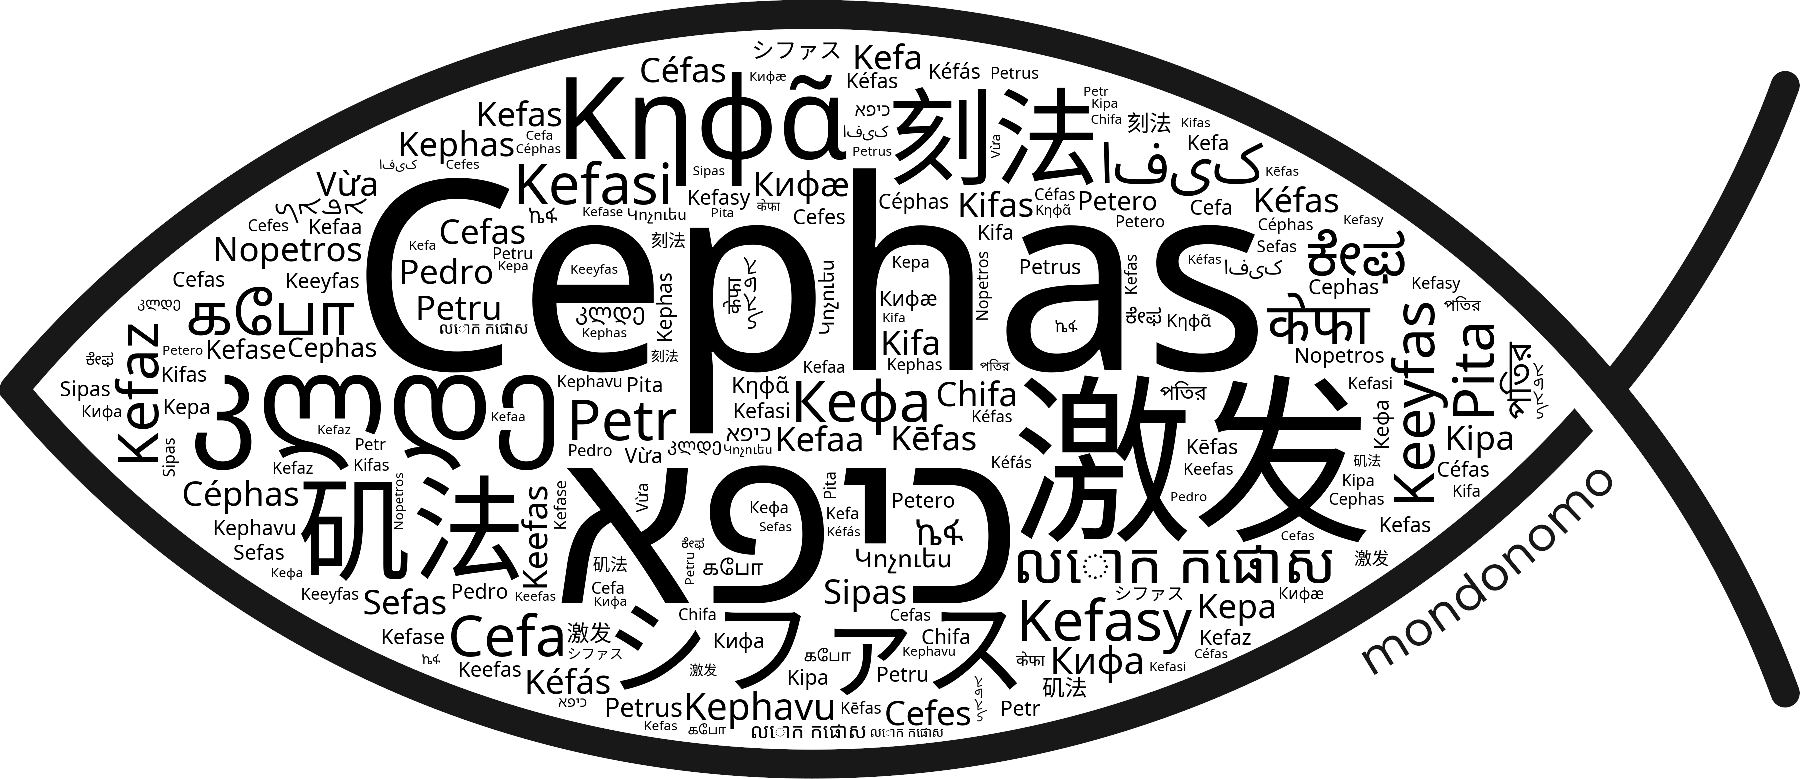 Name Cephas in the world's Bibles